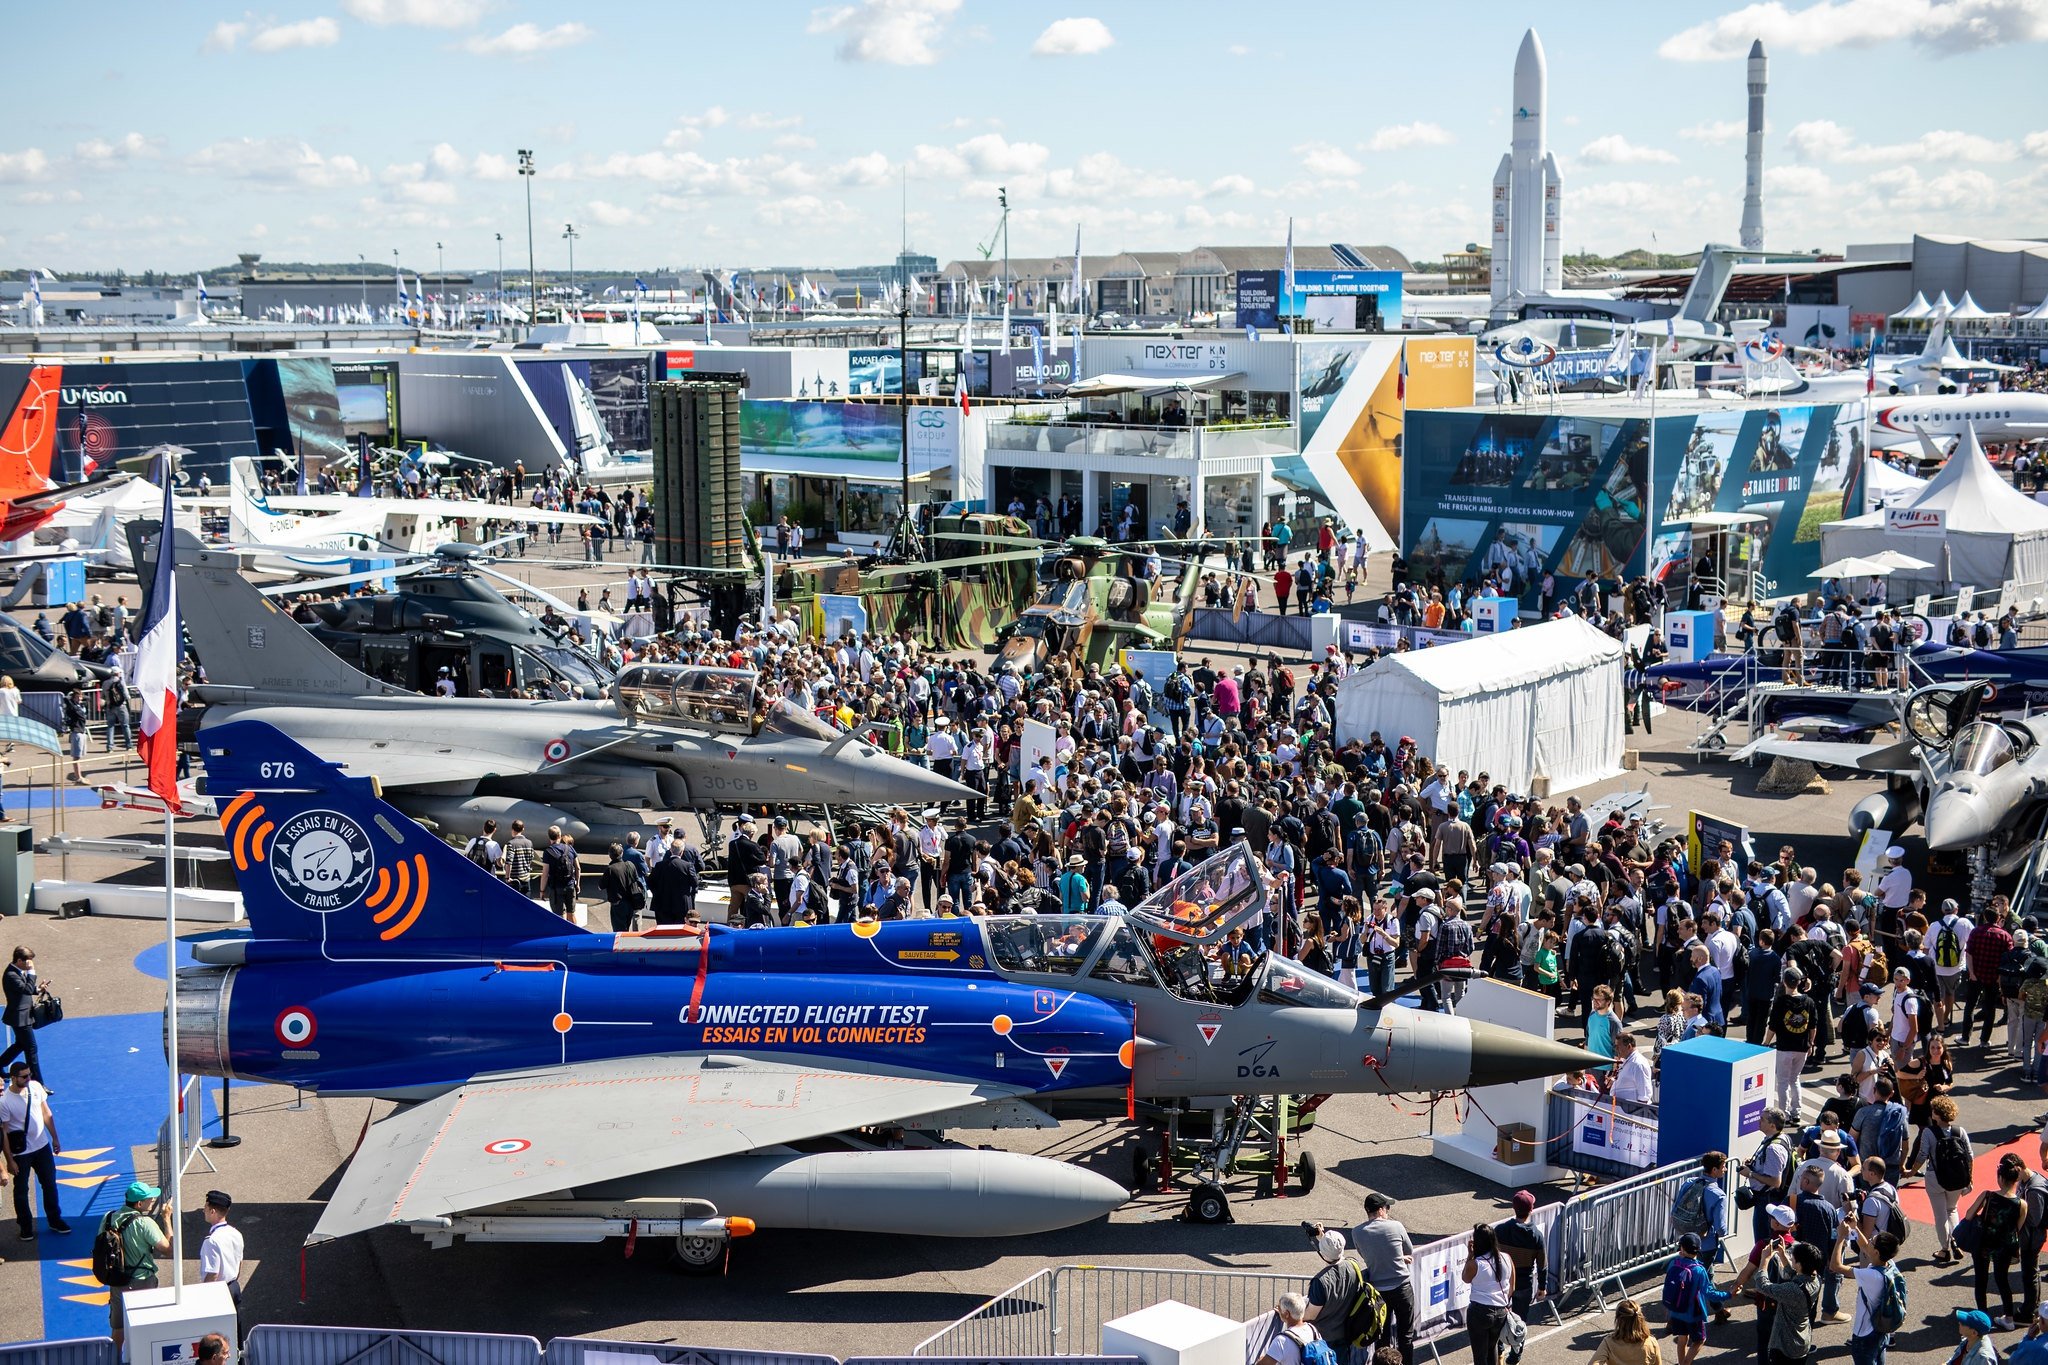 Prevention of the Pandemic in the future 2021 Paris Air Show Cancellation